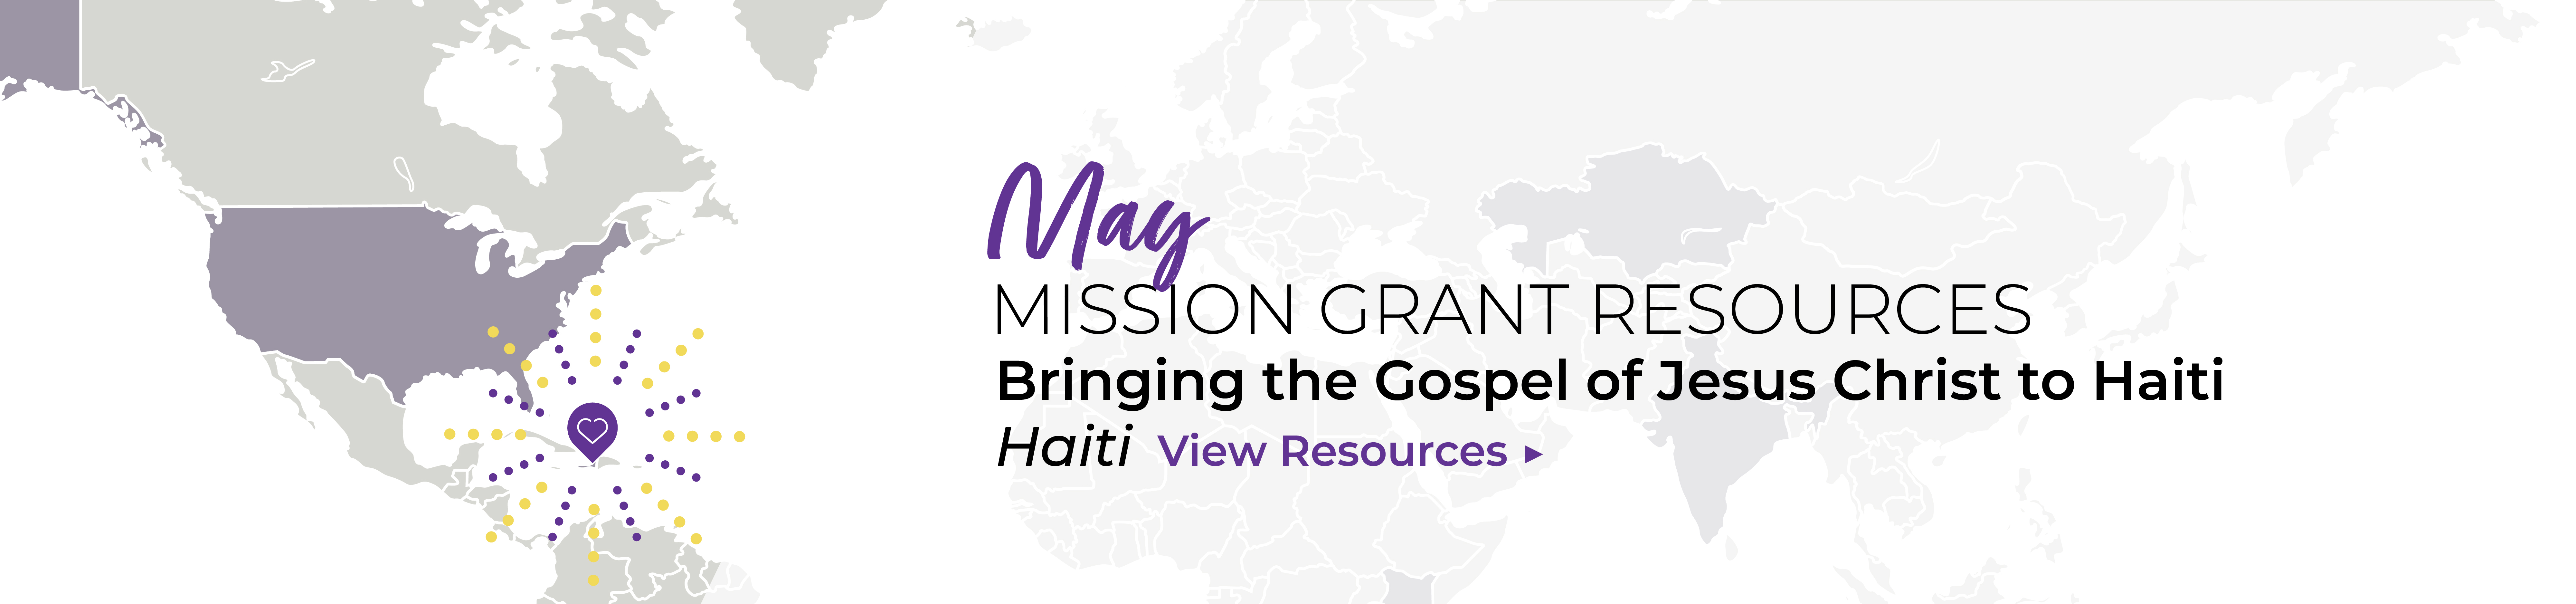 May Mission Grant Resources: Bringing the Gospel of Jesus Christ to Haiti. View Resources.